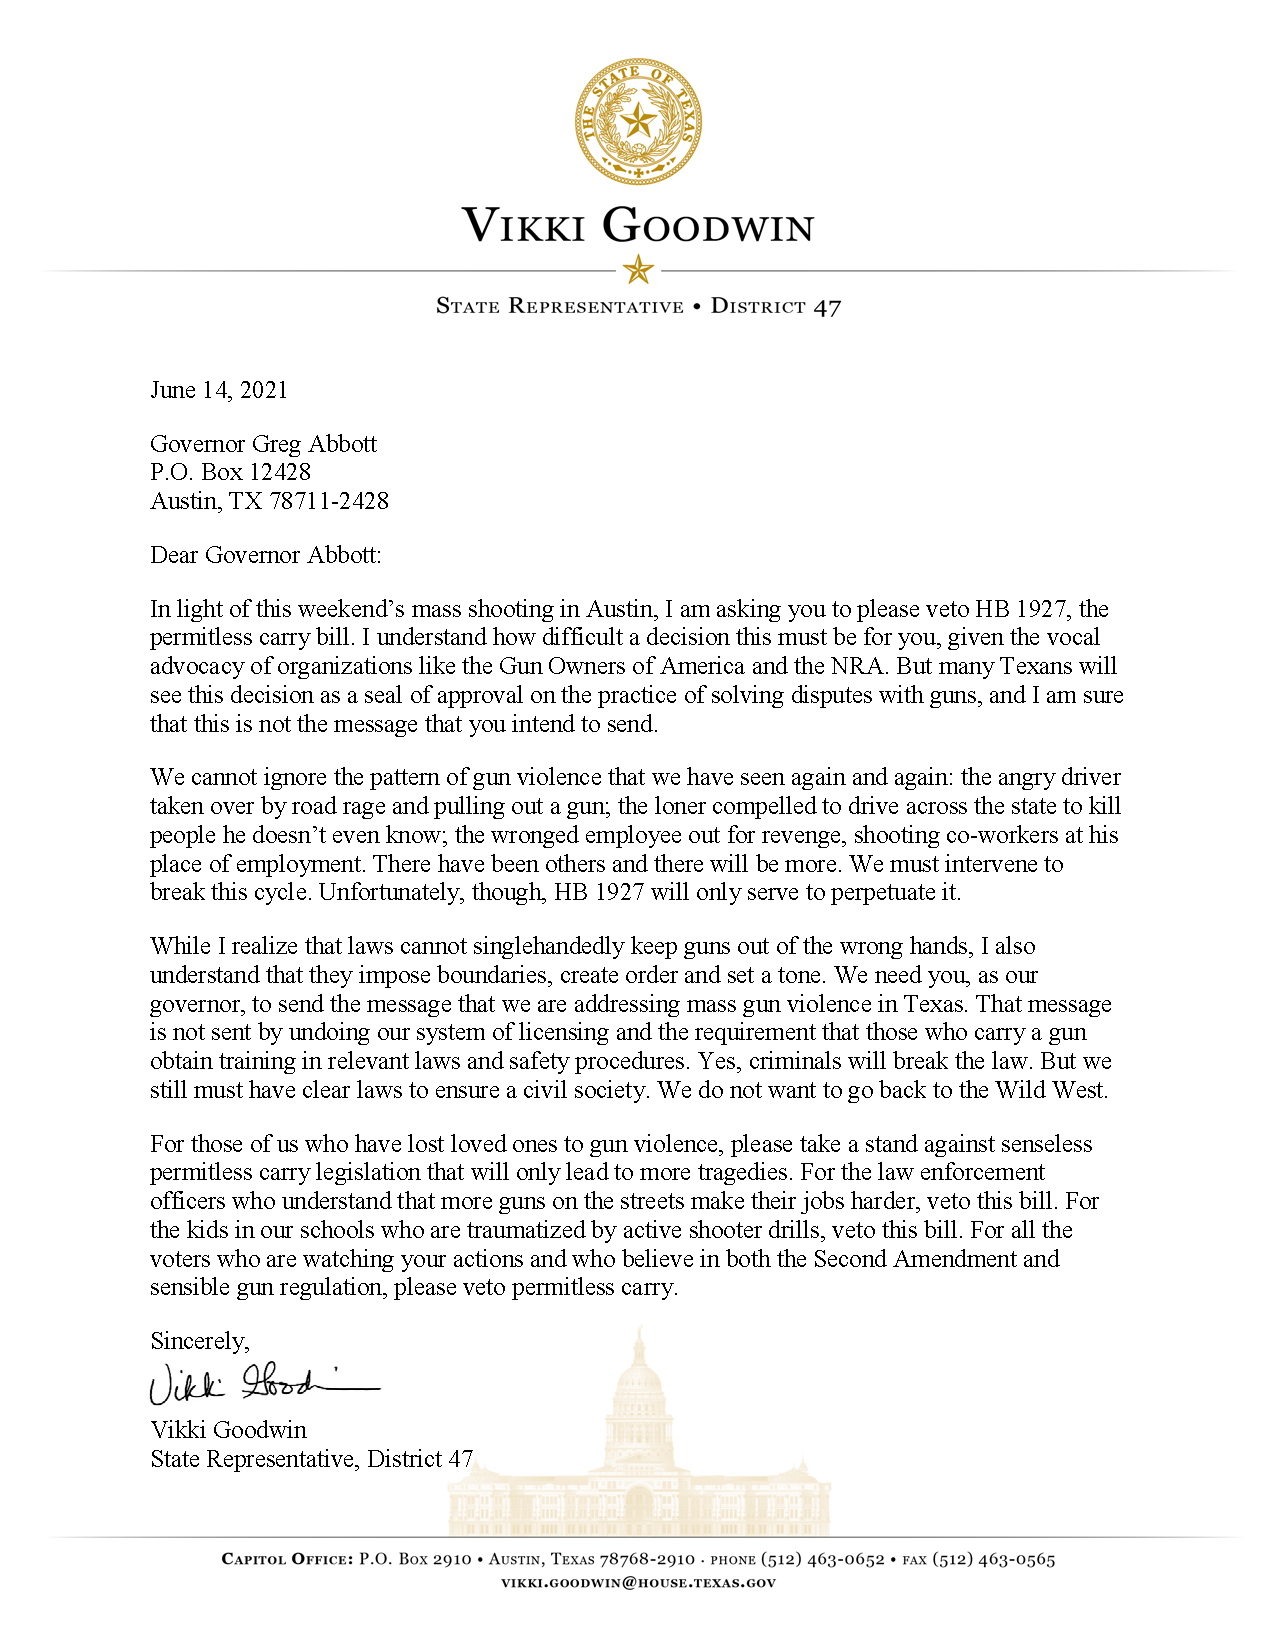  As Austin recovers from a senseless mass shooting this weekend leaving one person dead and 13 more injured, the permitless carry bill still sits on Governor Abbott's desk awaiting his signature. Today I sent a letter to the Governor asking him to ve